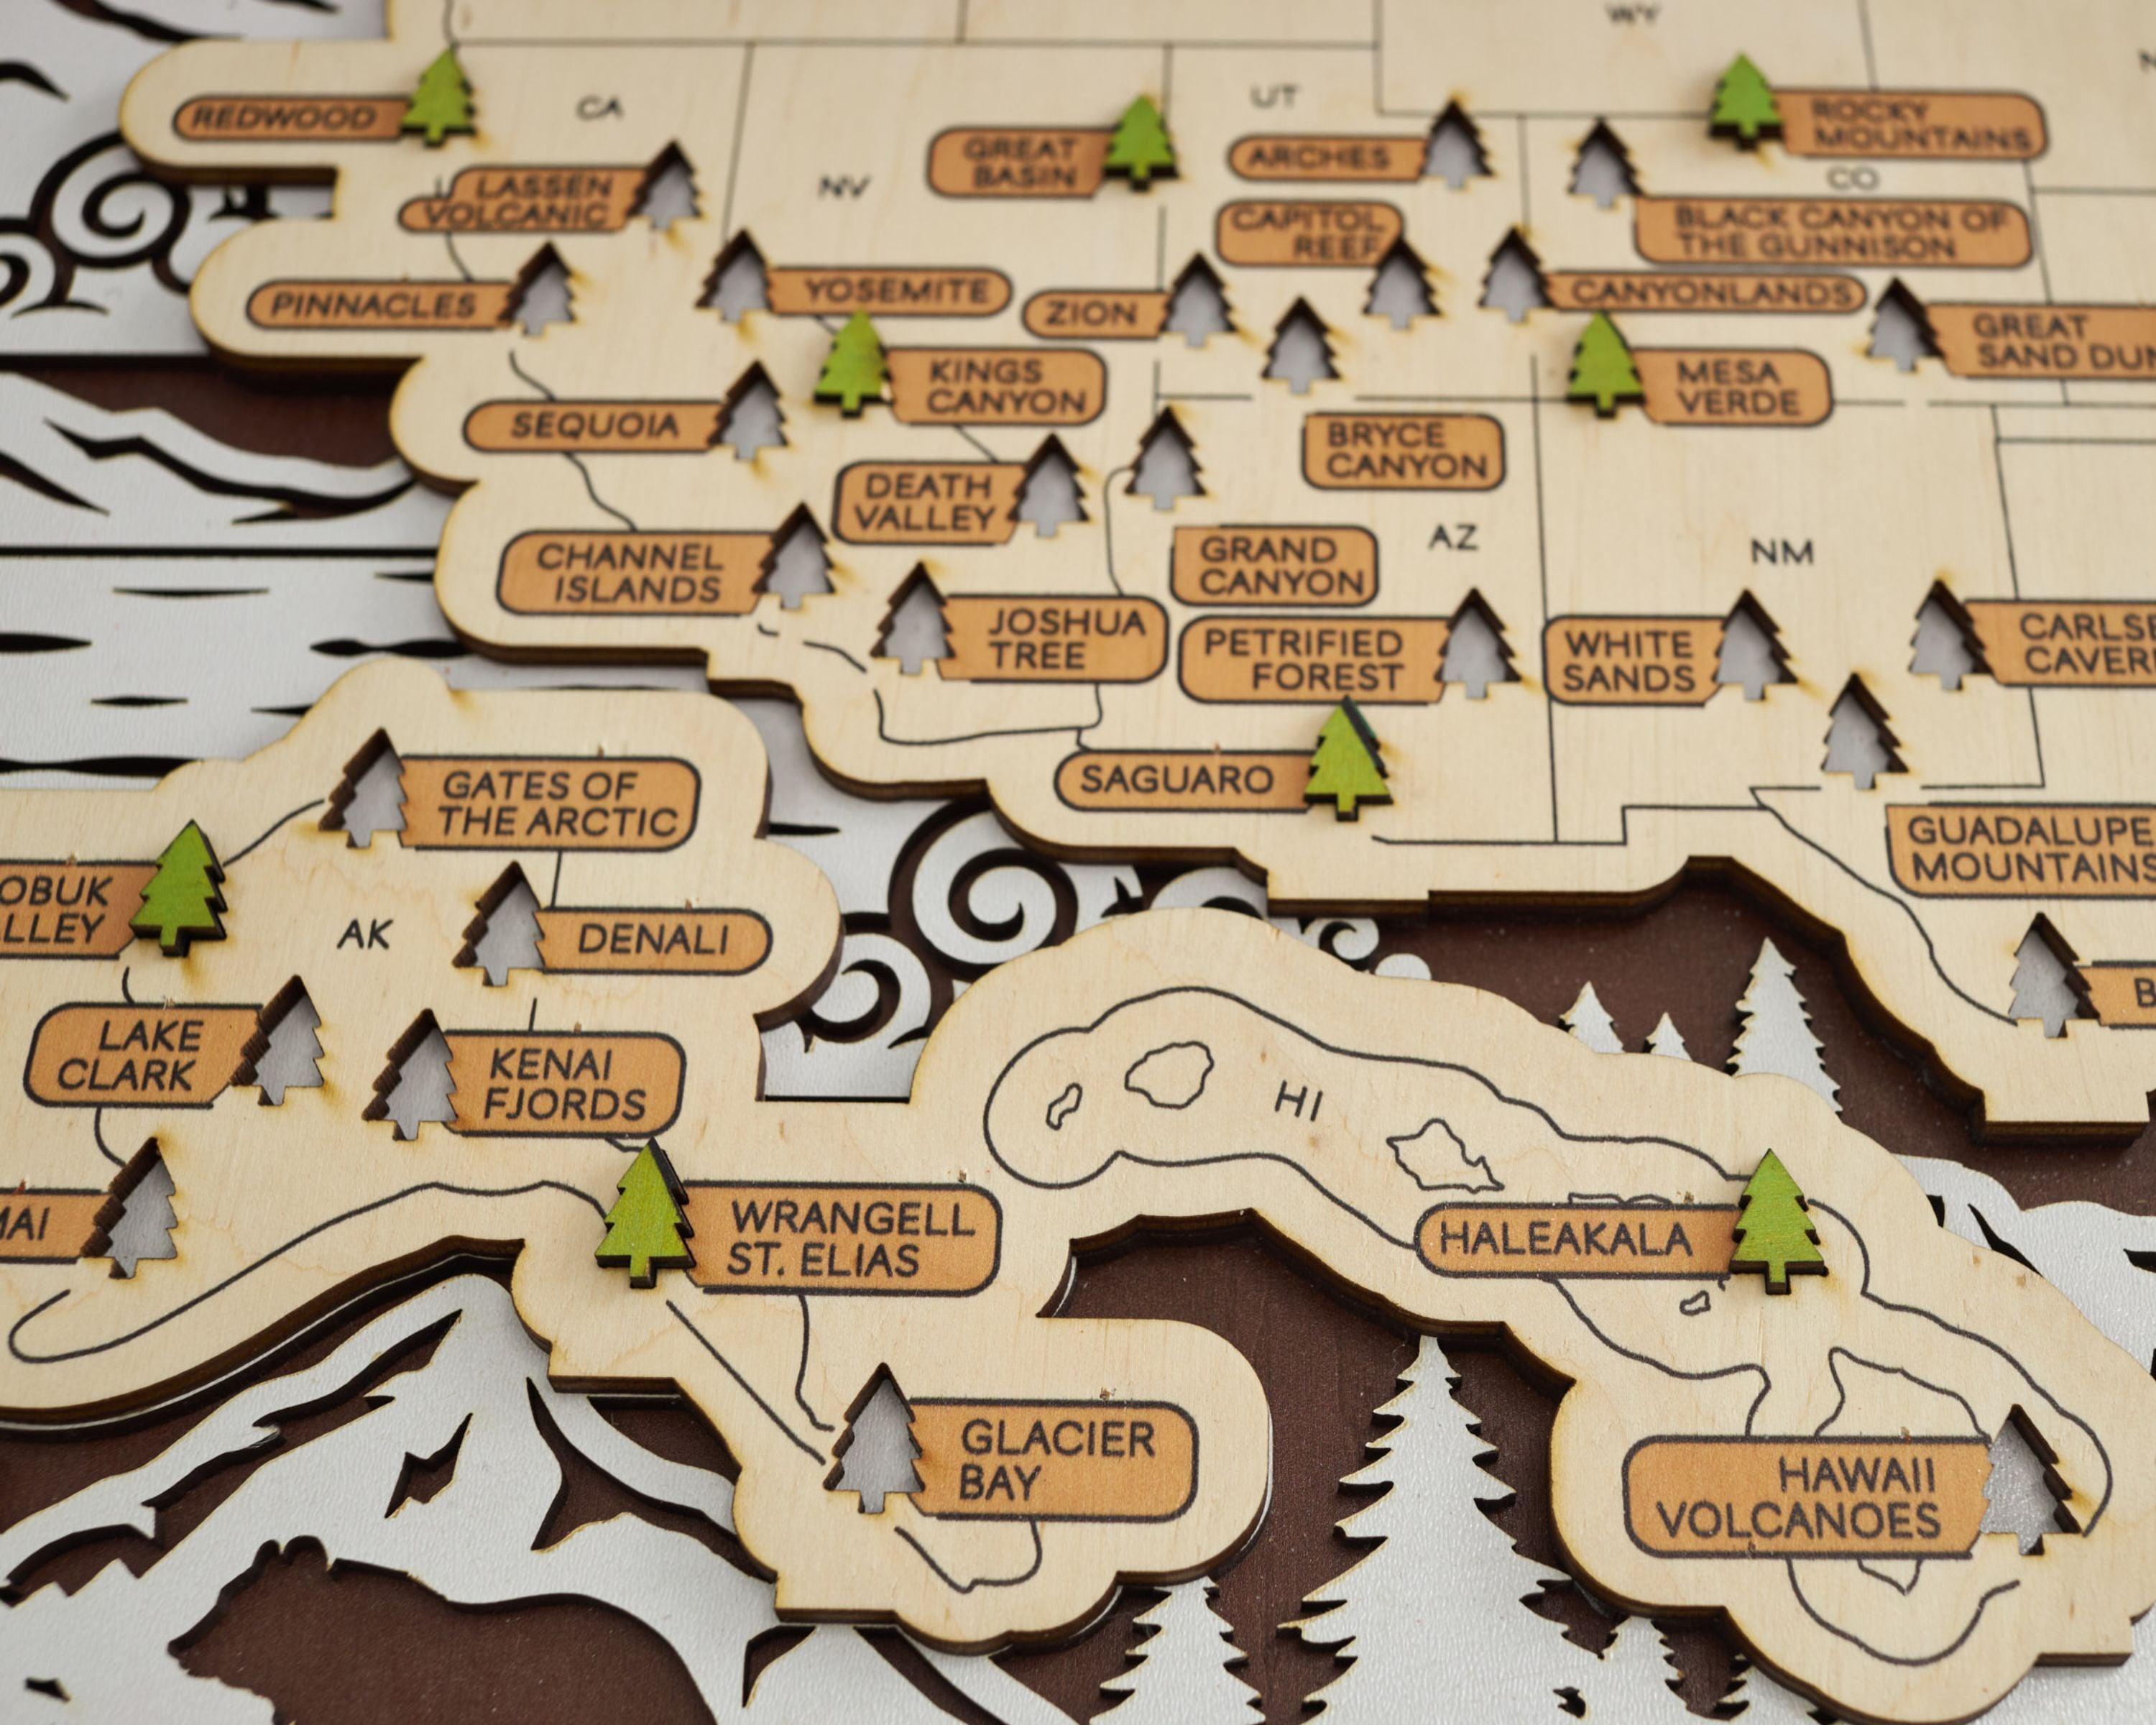 US 3D Wooden National Parks Travel Map With Trees To Record Park Visits (Wildlife Design) - Lemap